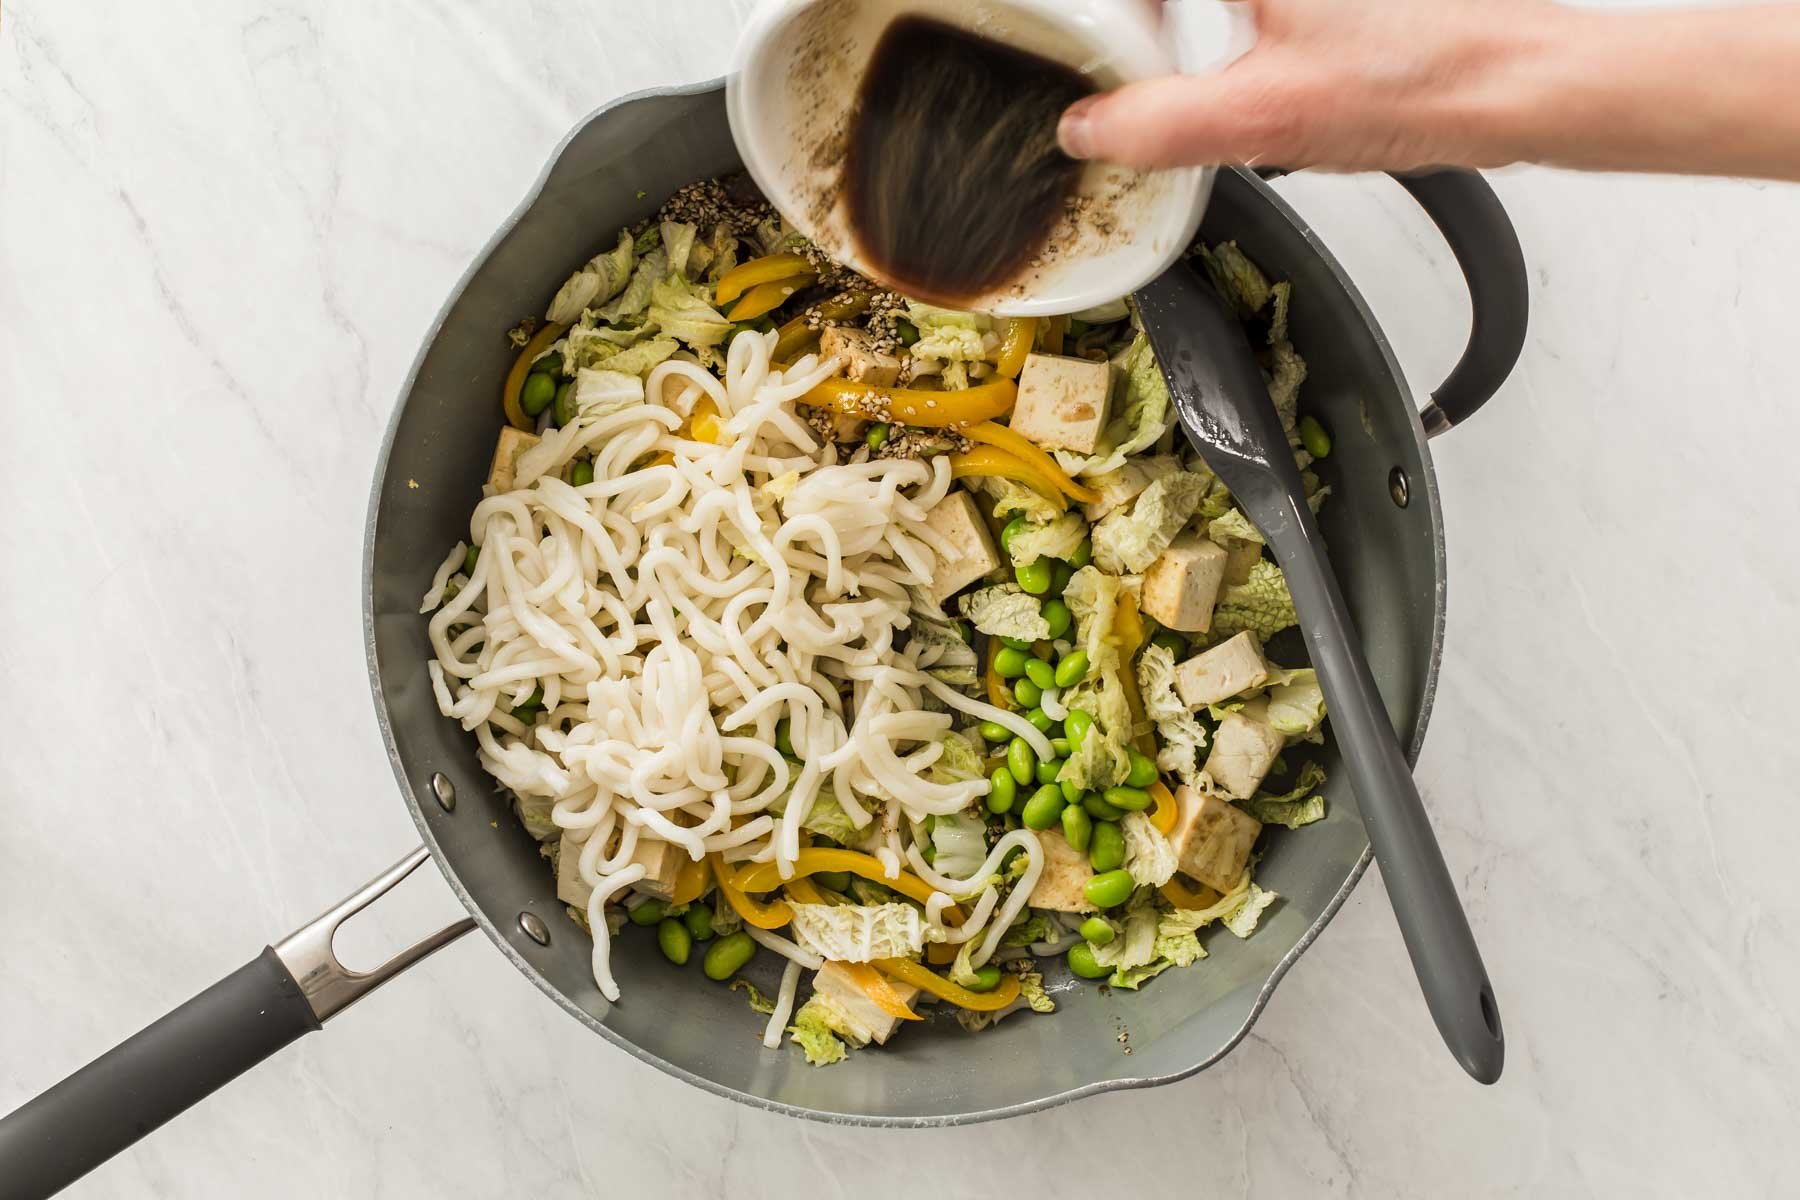 Hand pouring stir fry sauce over noodles and vegetables in grey pan.